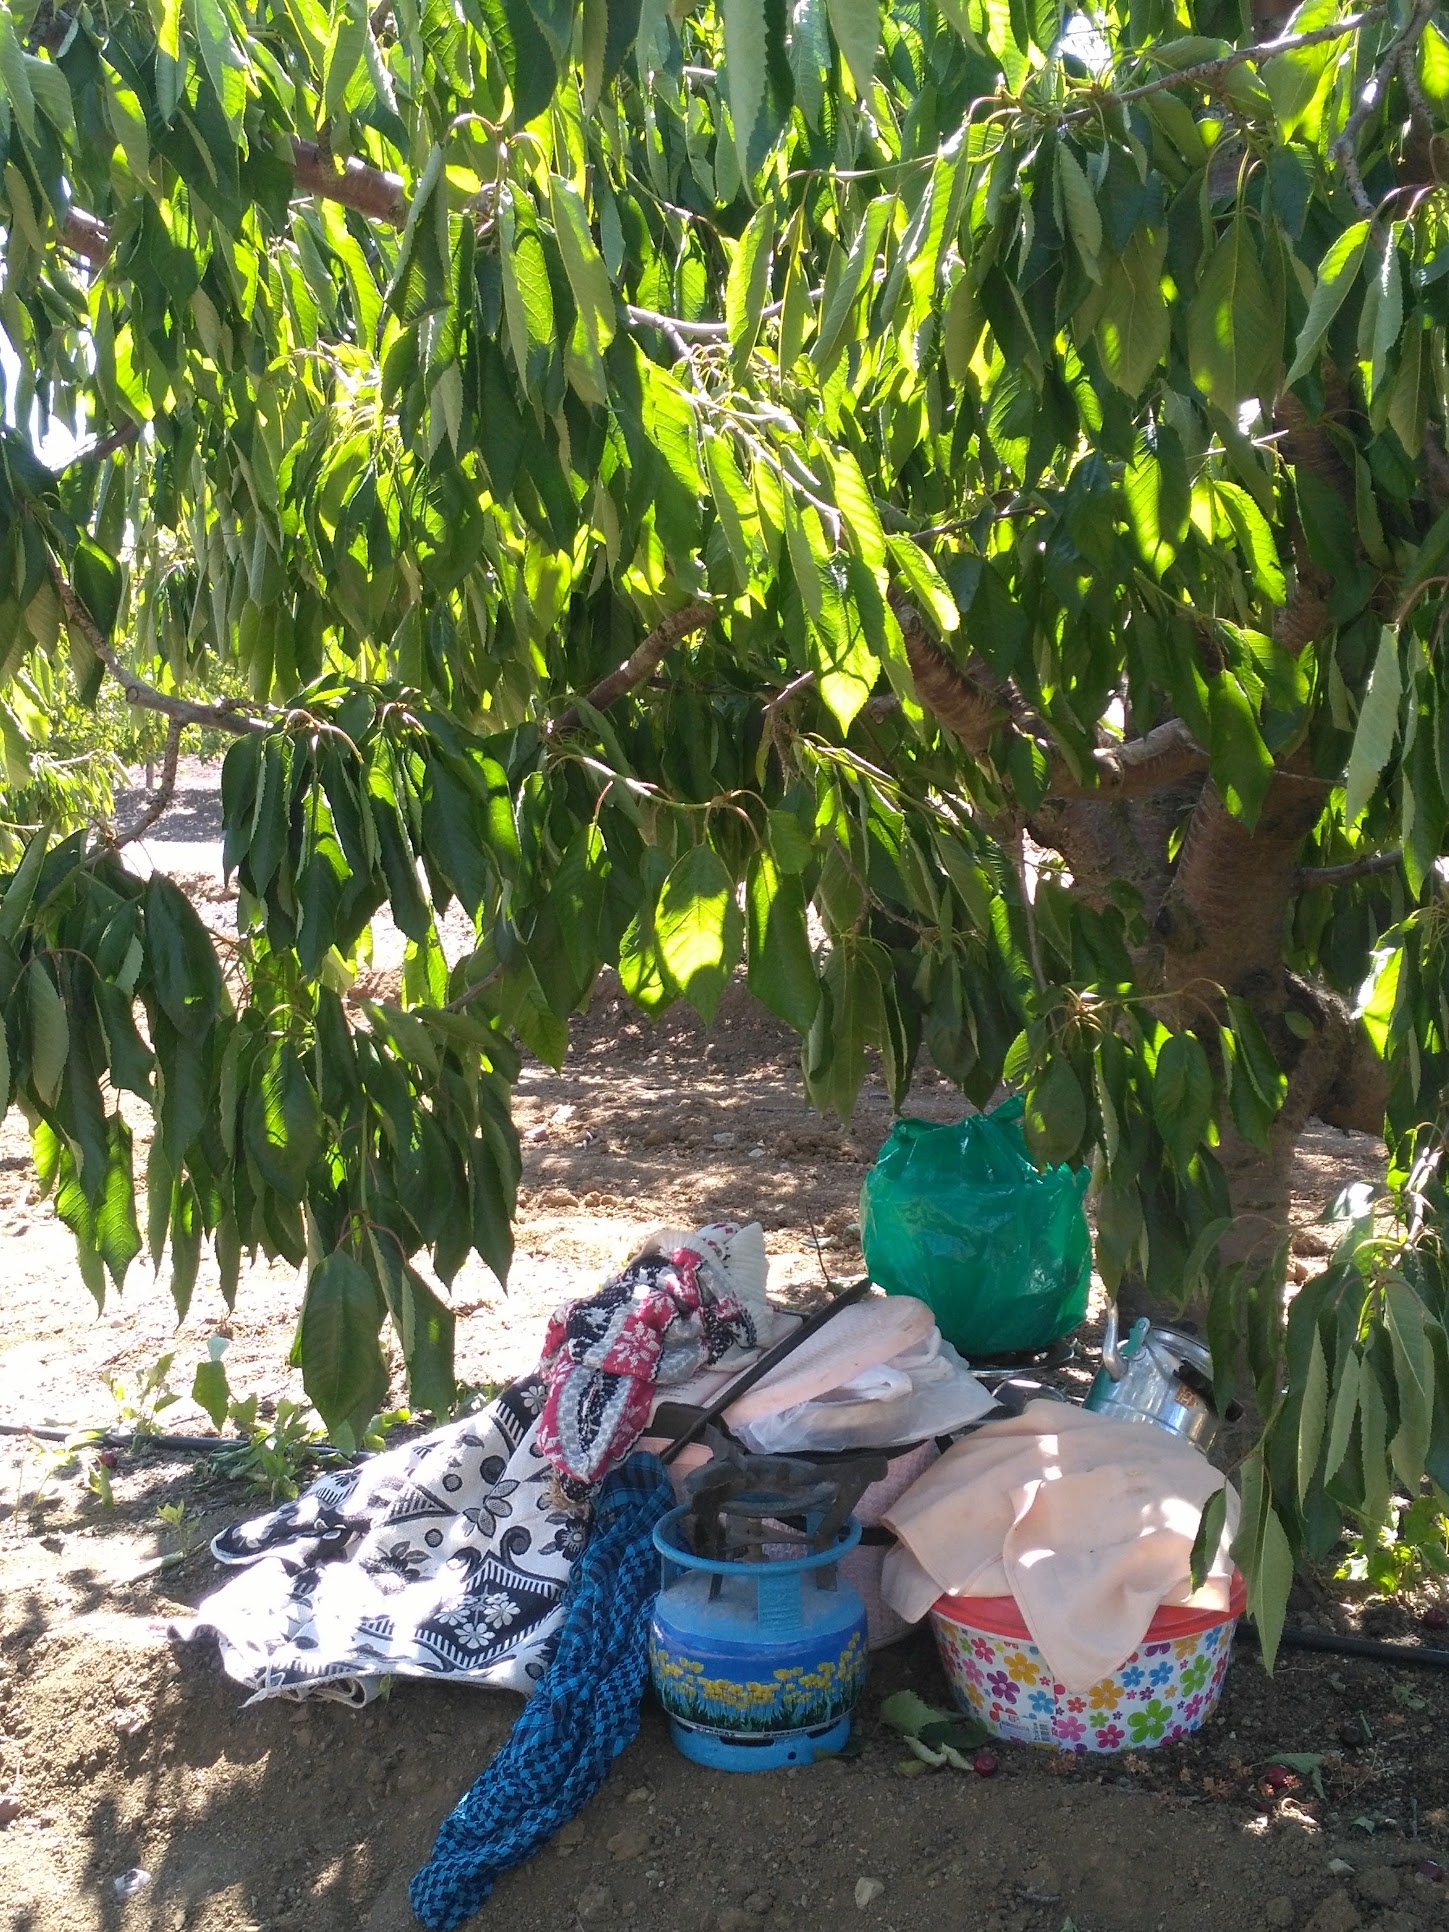 a pile of full plastic bags and cloths covering vessels, and a small cooking stove attached to a propane tank in the foreground, shaded by the cherry trees in the background.